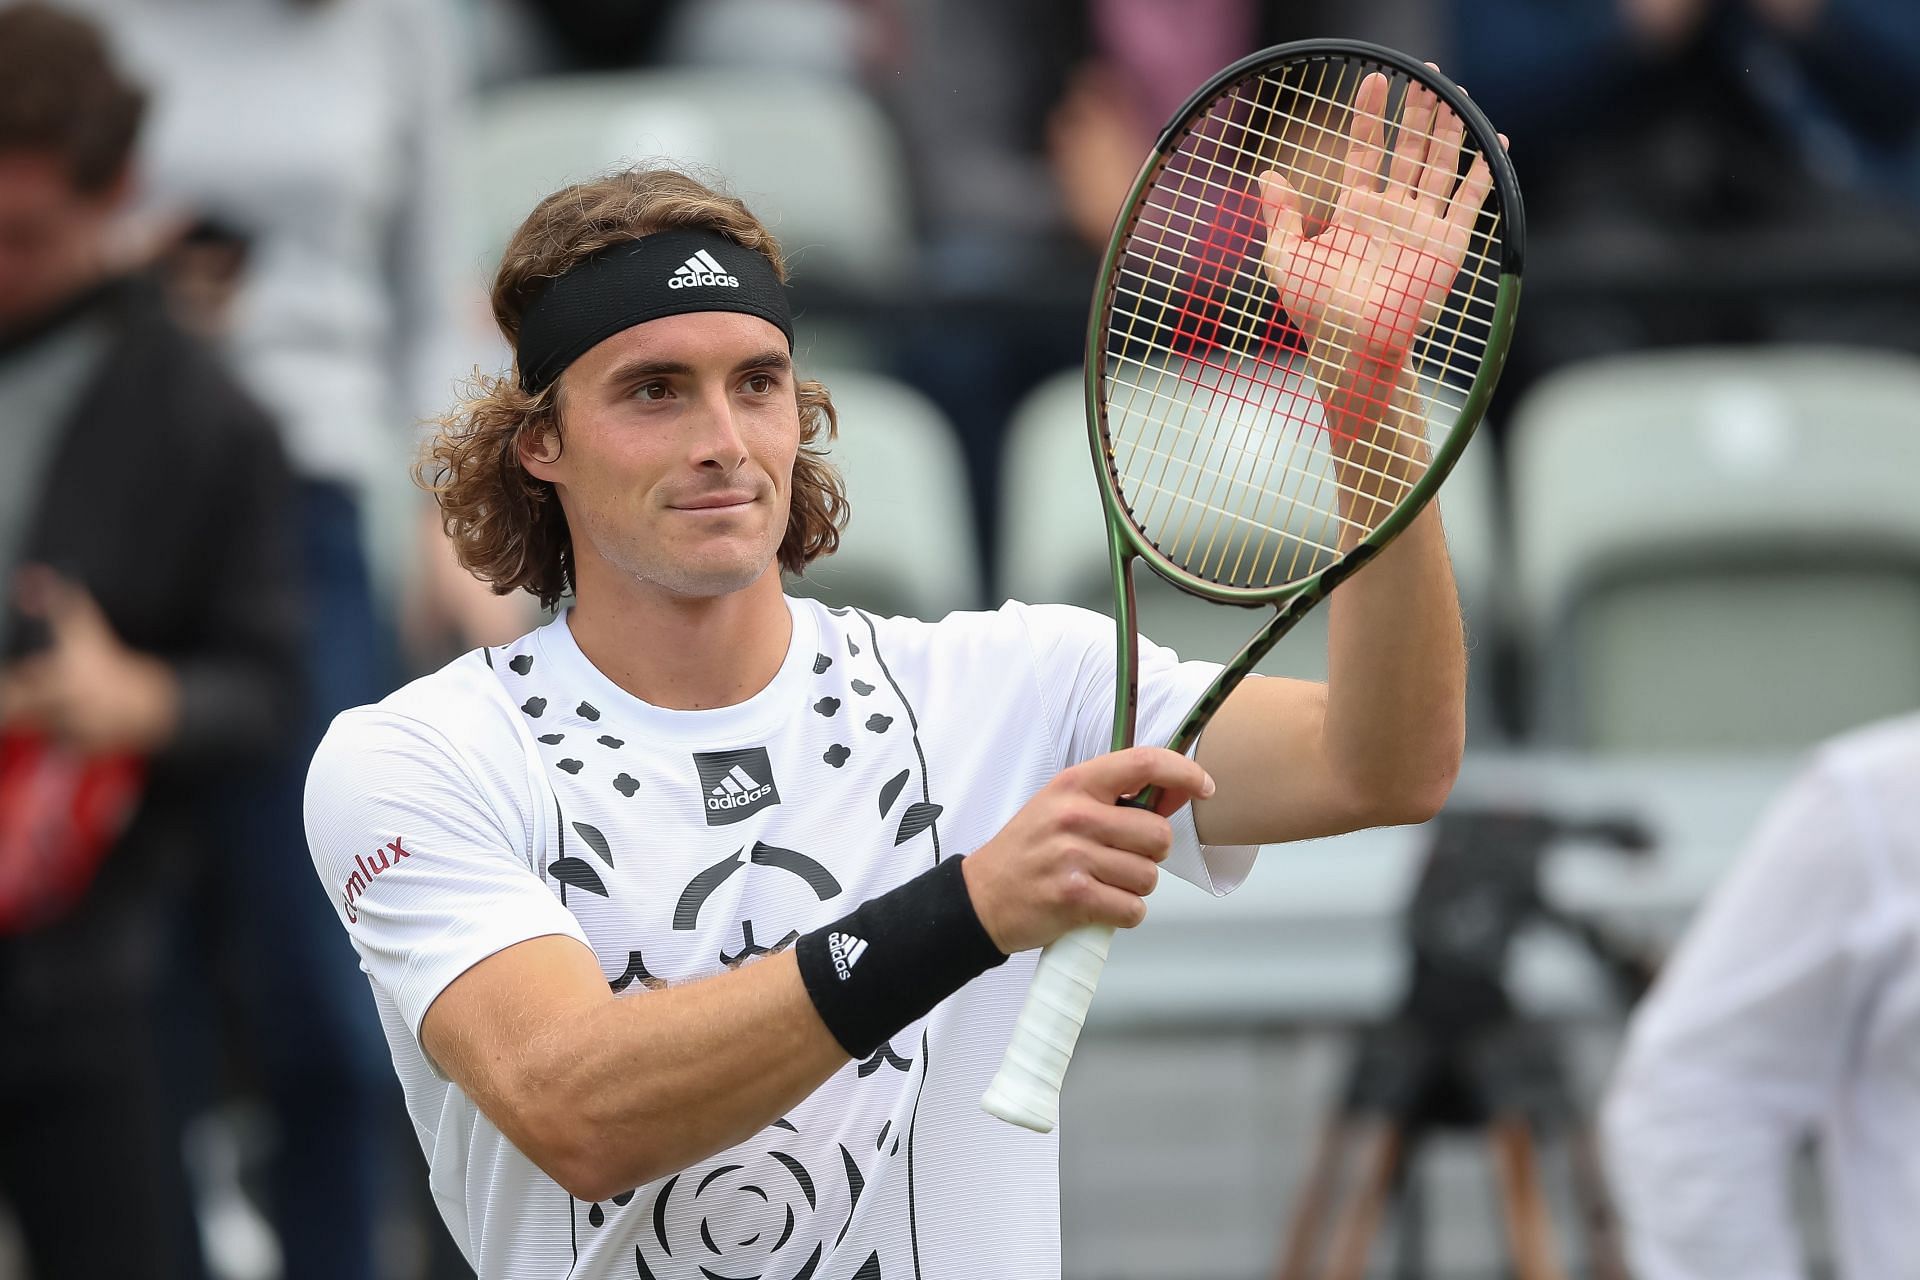 Stefanos Tsitsipas continues the hunt for his first grasscourt title